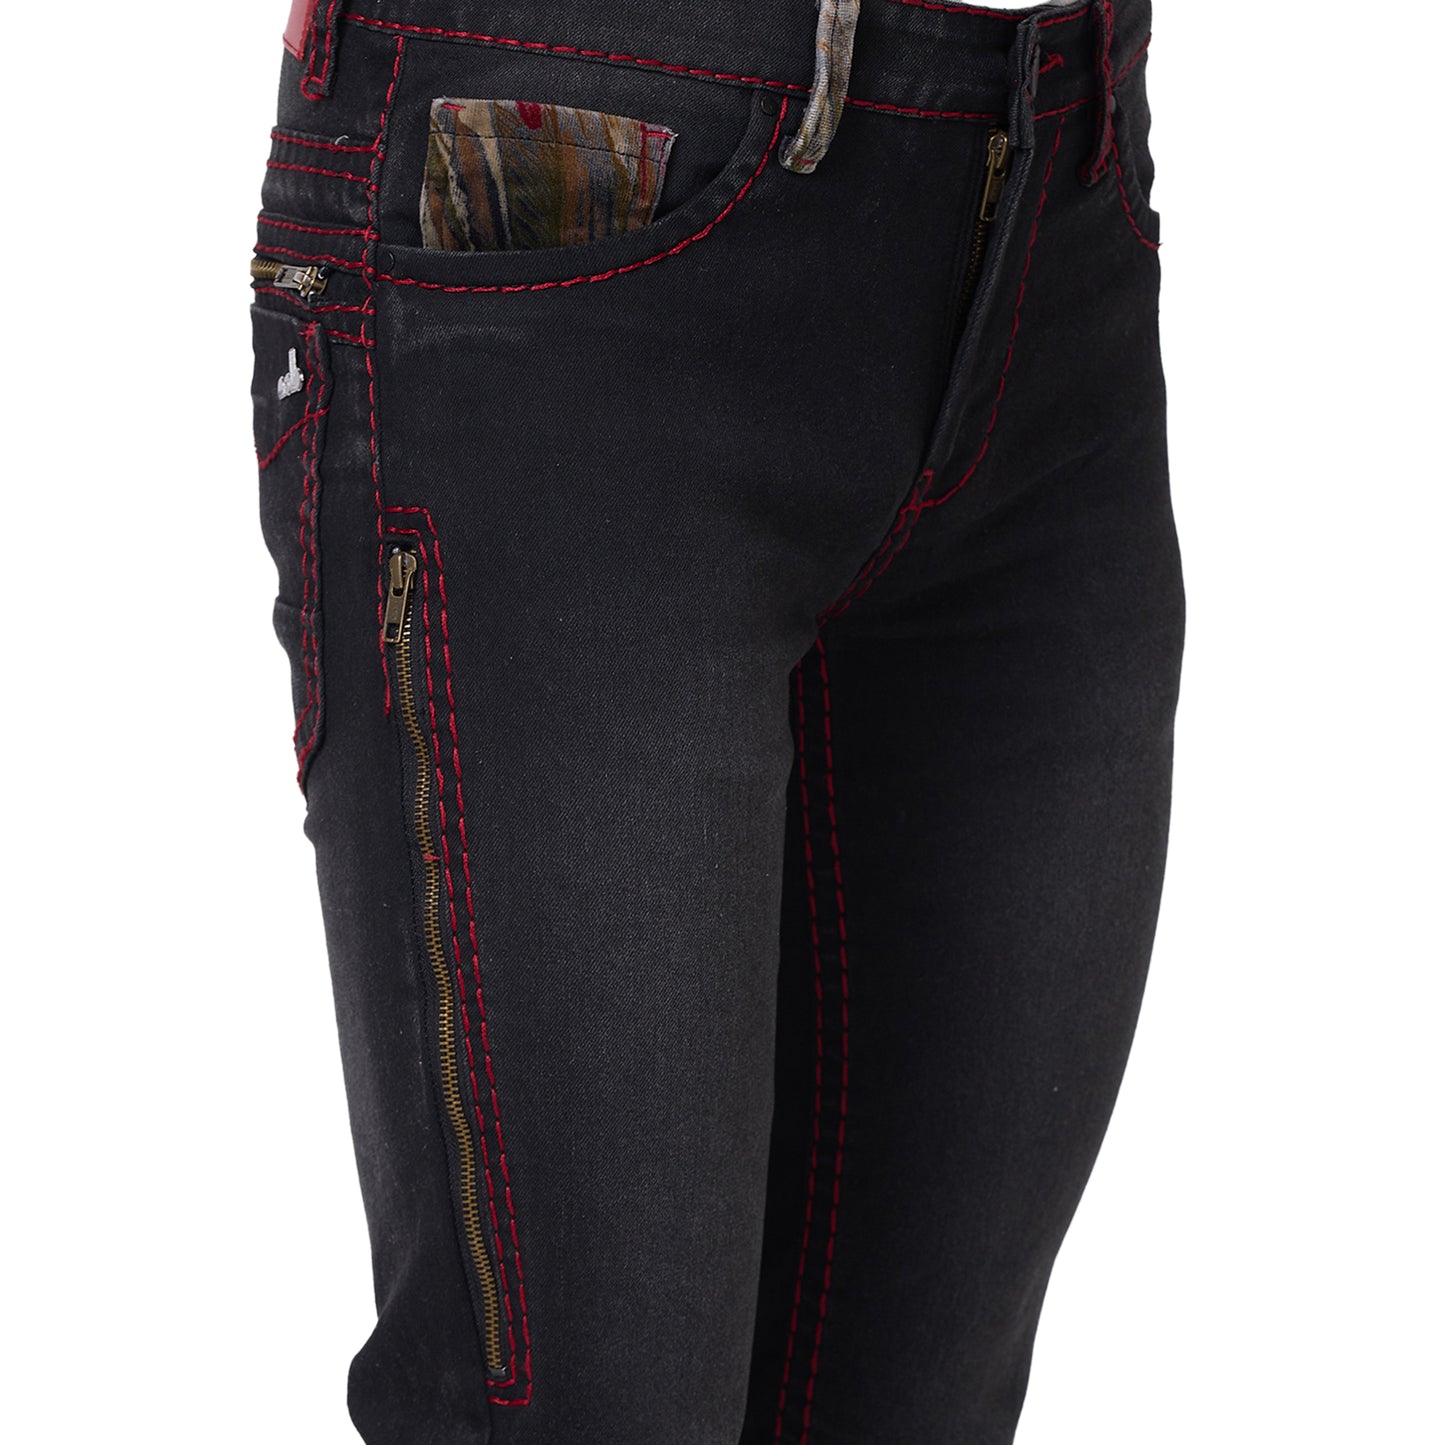 Mens Black Faded Bootcut Slim Fit Jeans With Maroon Saddle Stitch